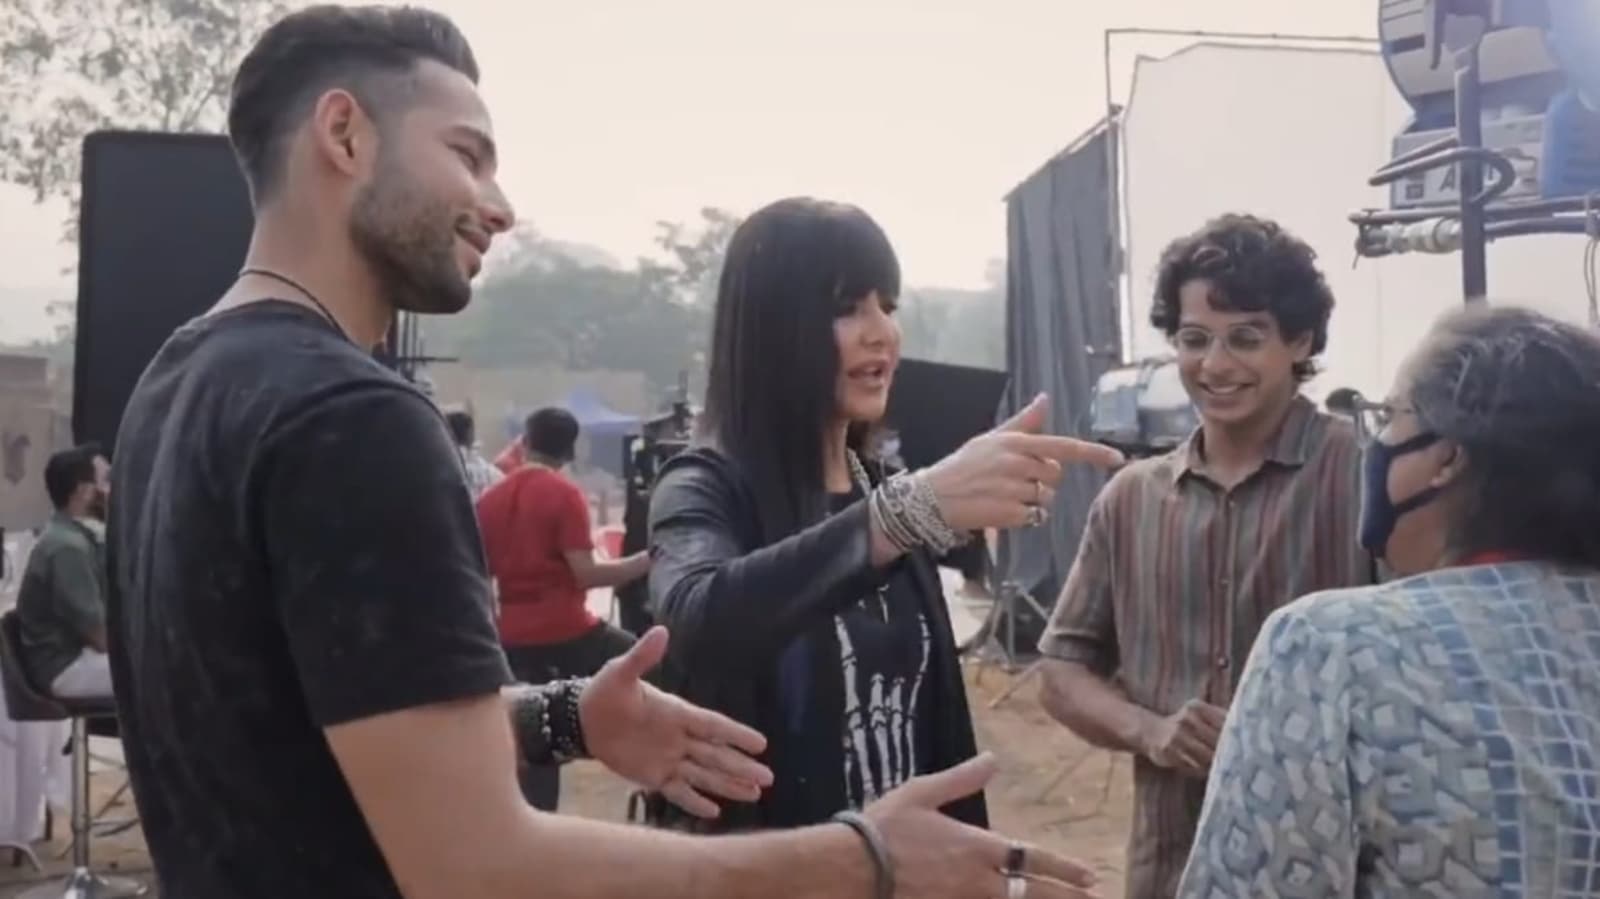 Katrina Kaif gets rap lessons from Ishaan Khatter and Siddhant Chaturvedi on Phone Bhoot set in fun BTS video. Watch